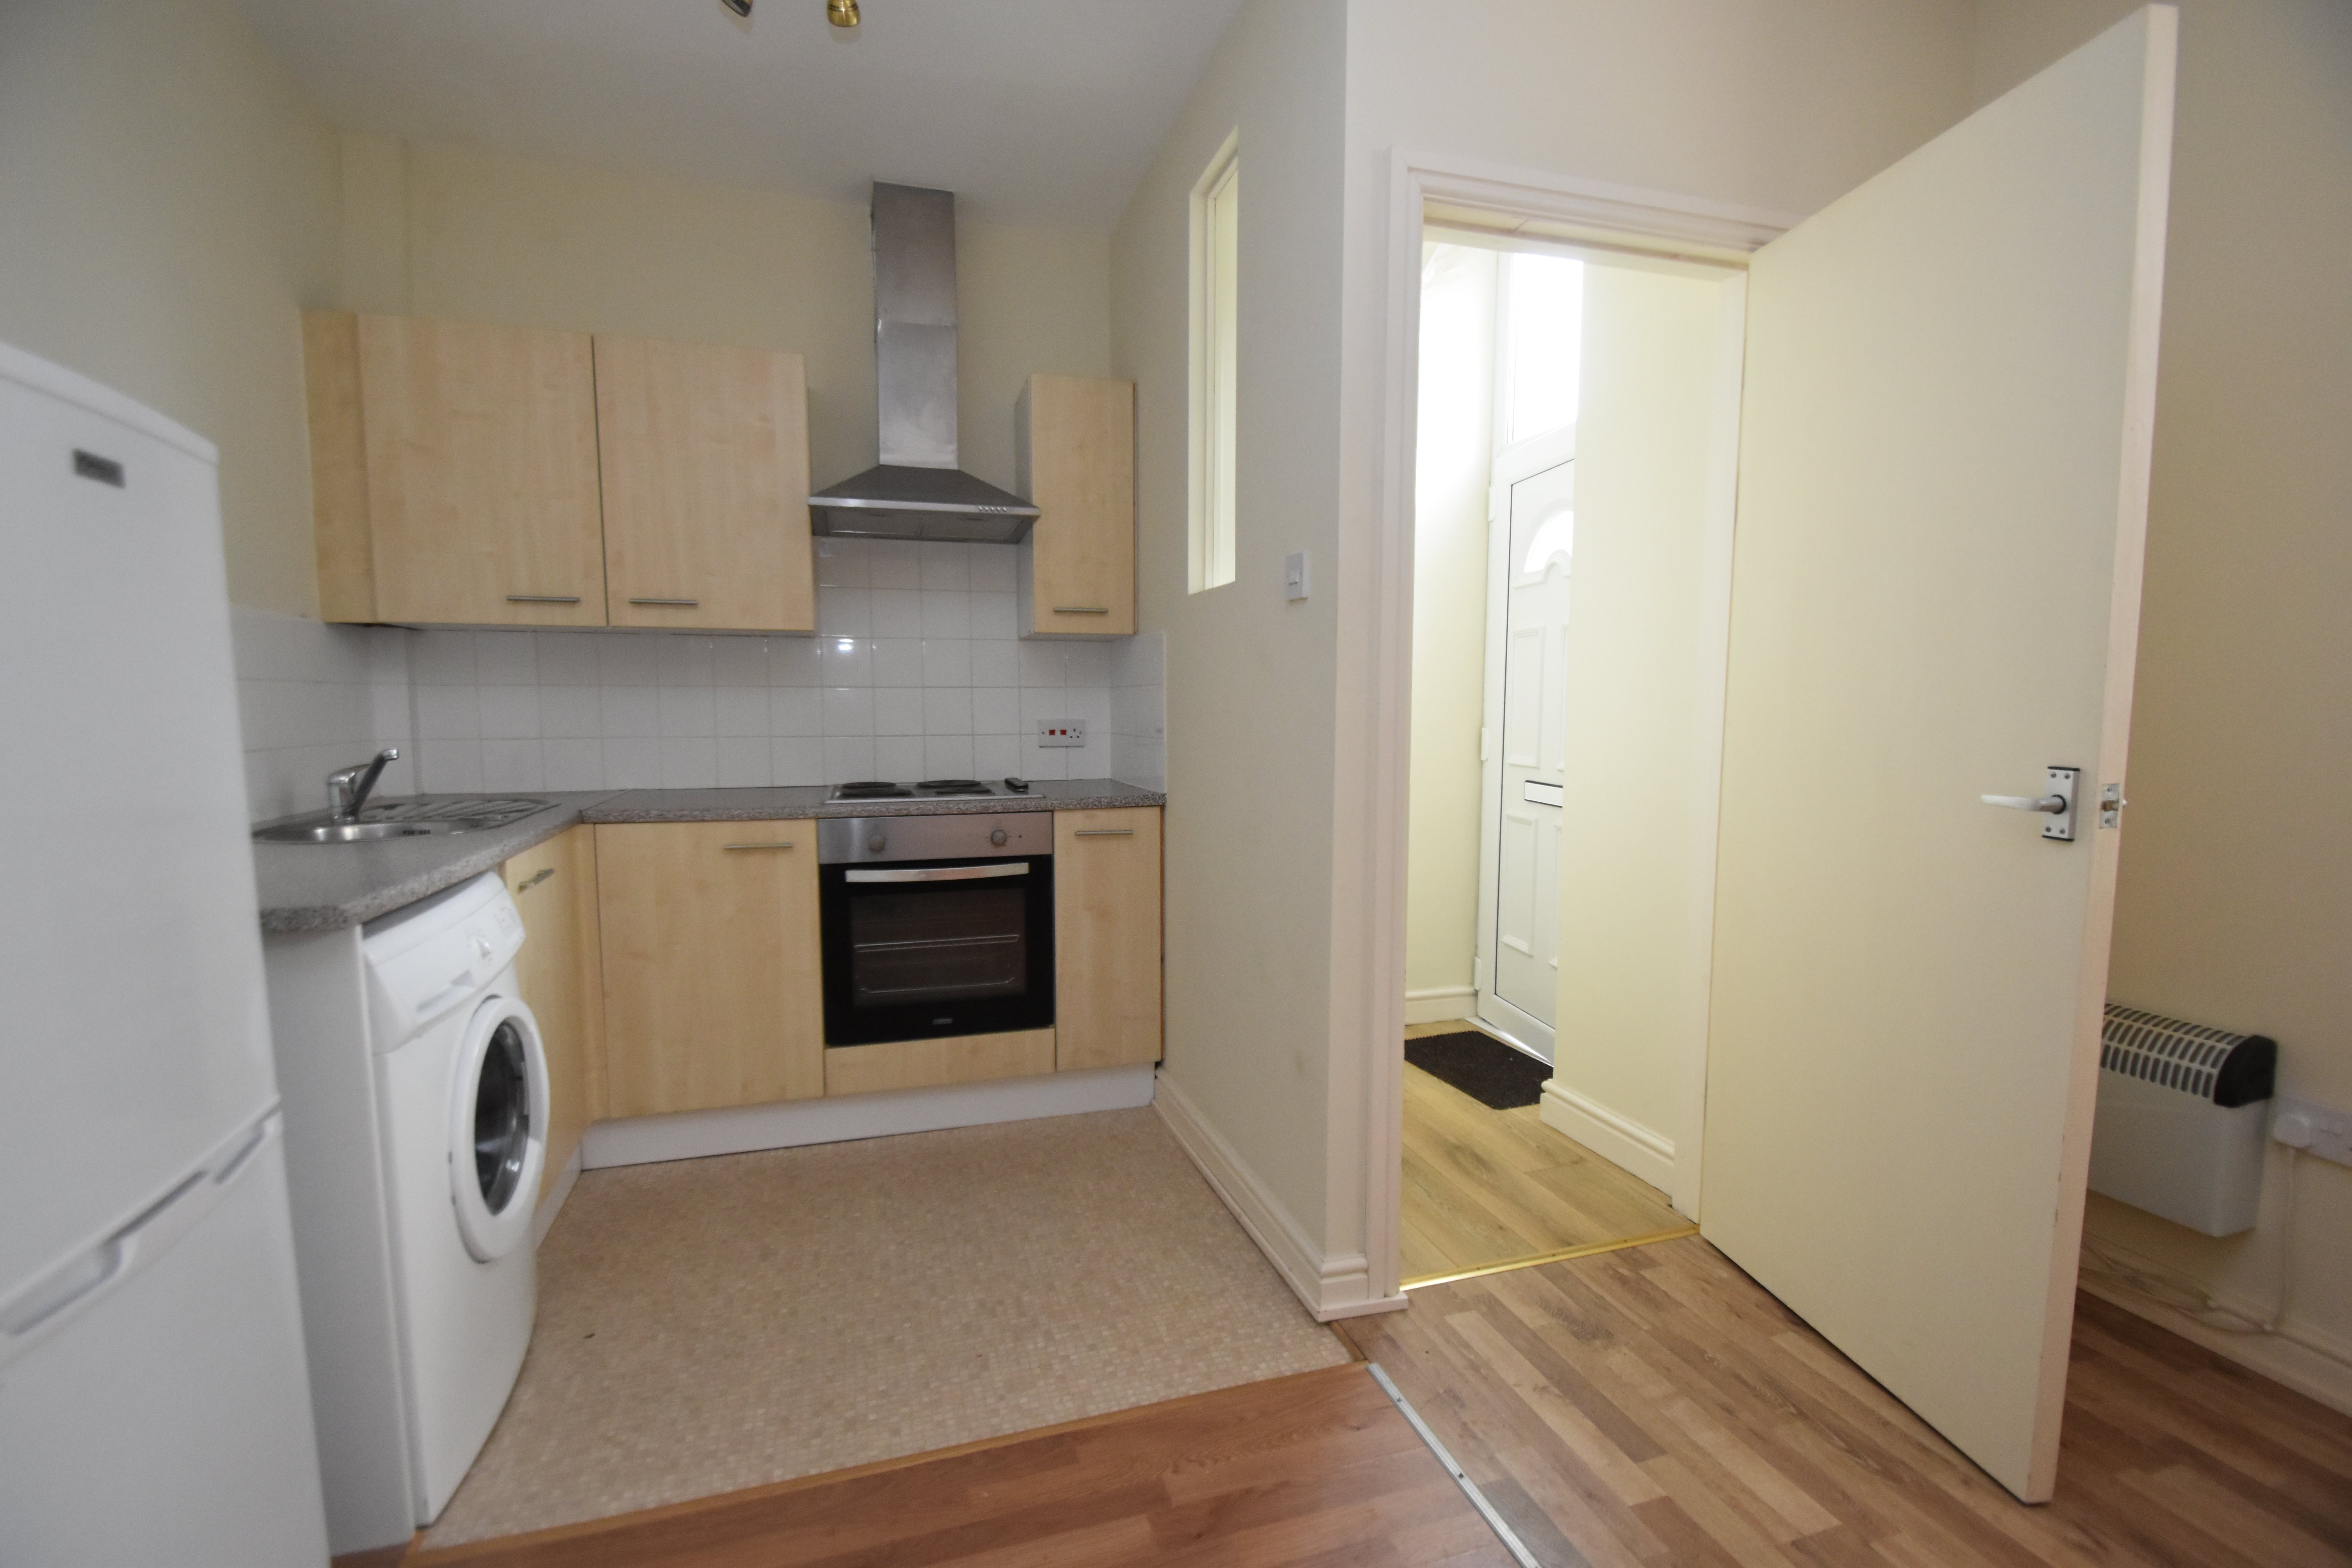 1 bed flat to rent in Piercefield Place, ADAMSDOWN  - Property Image 6